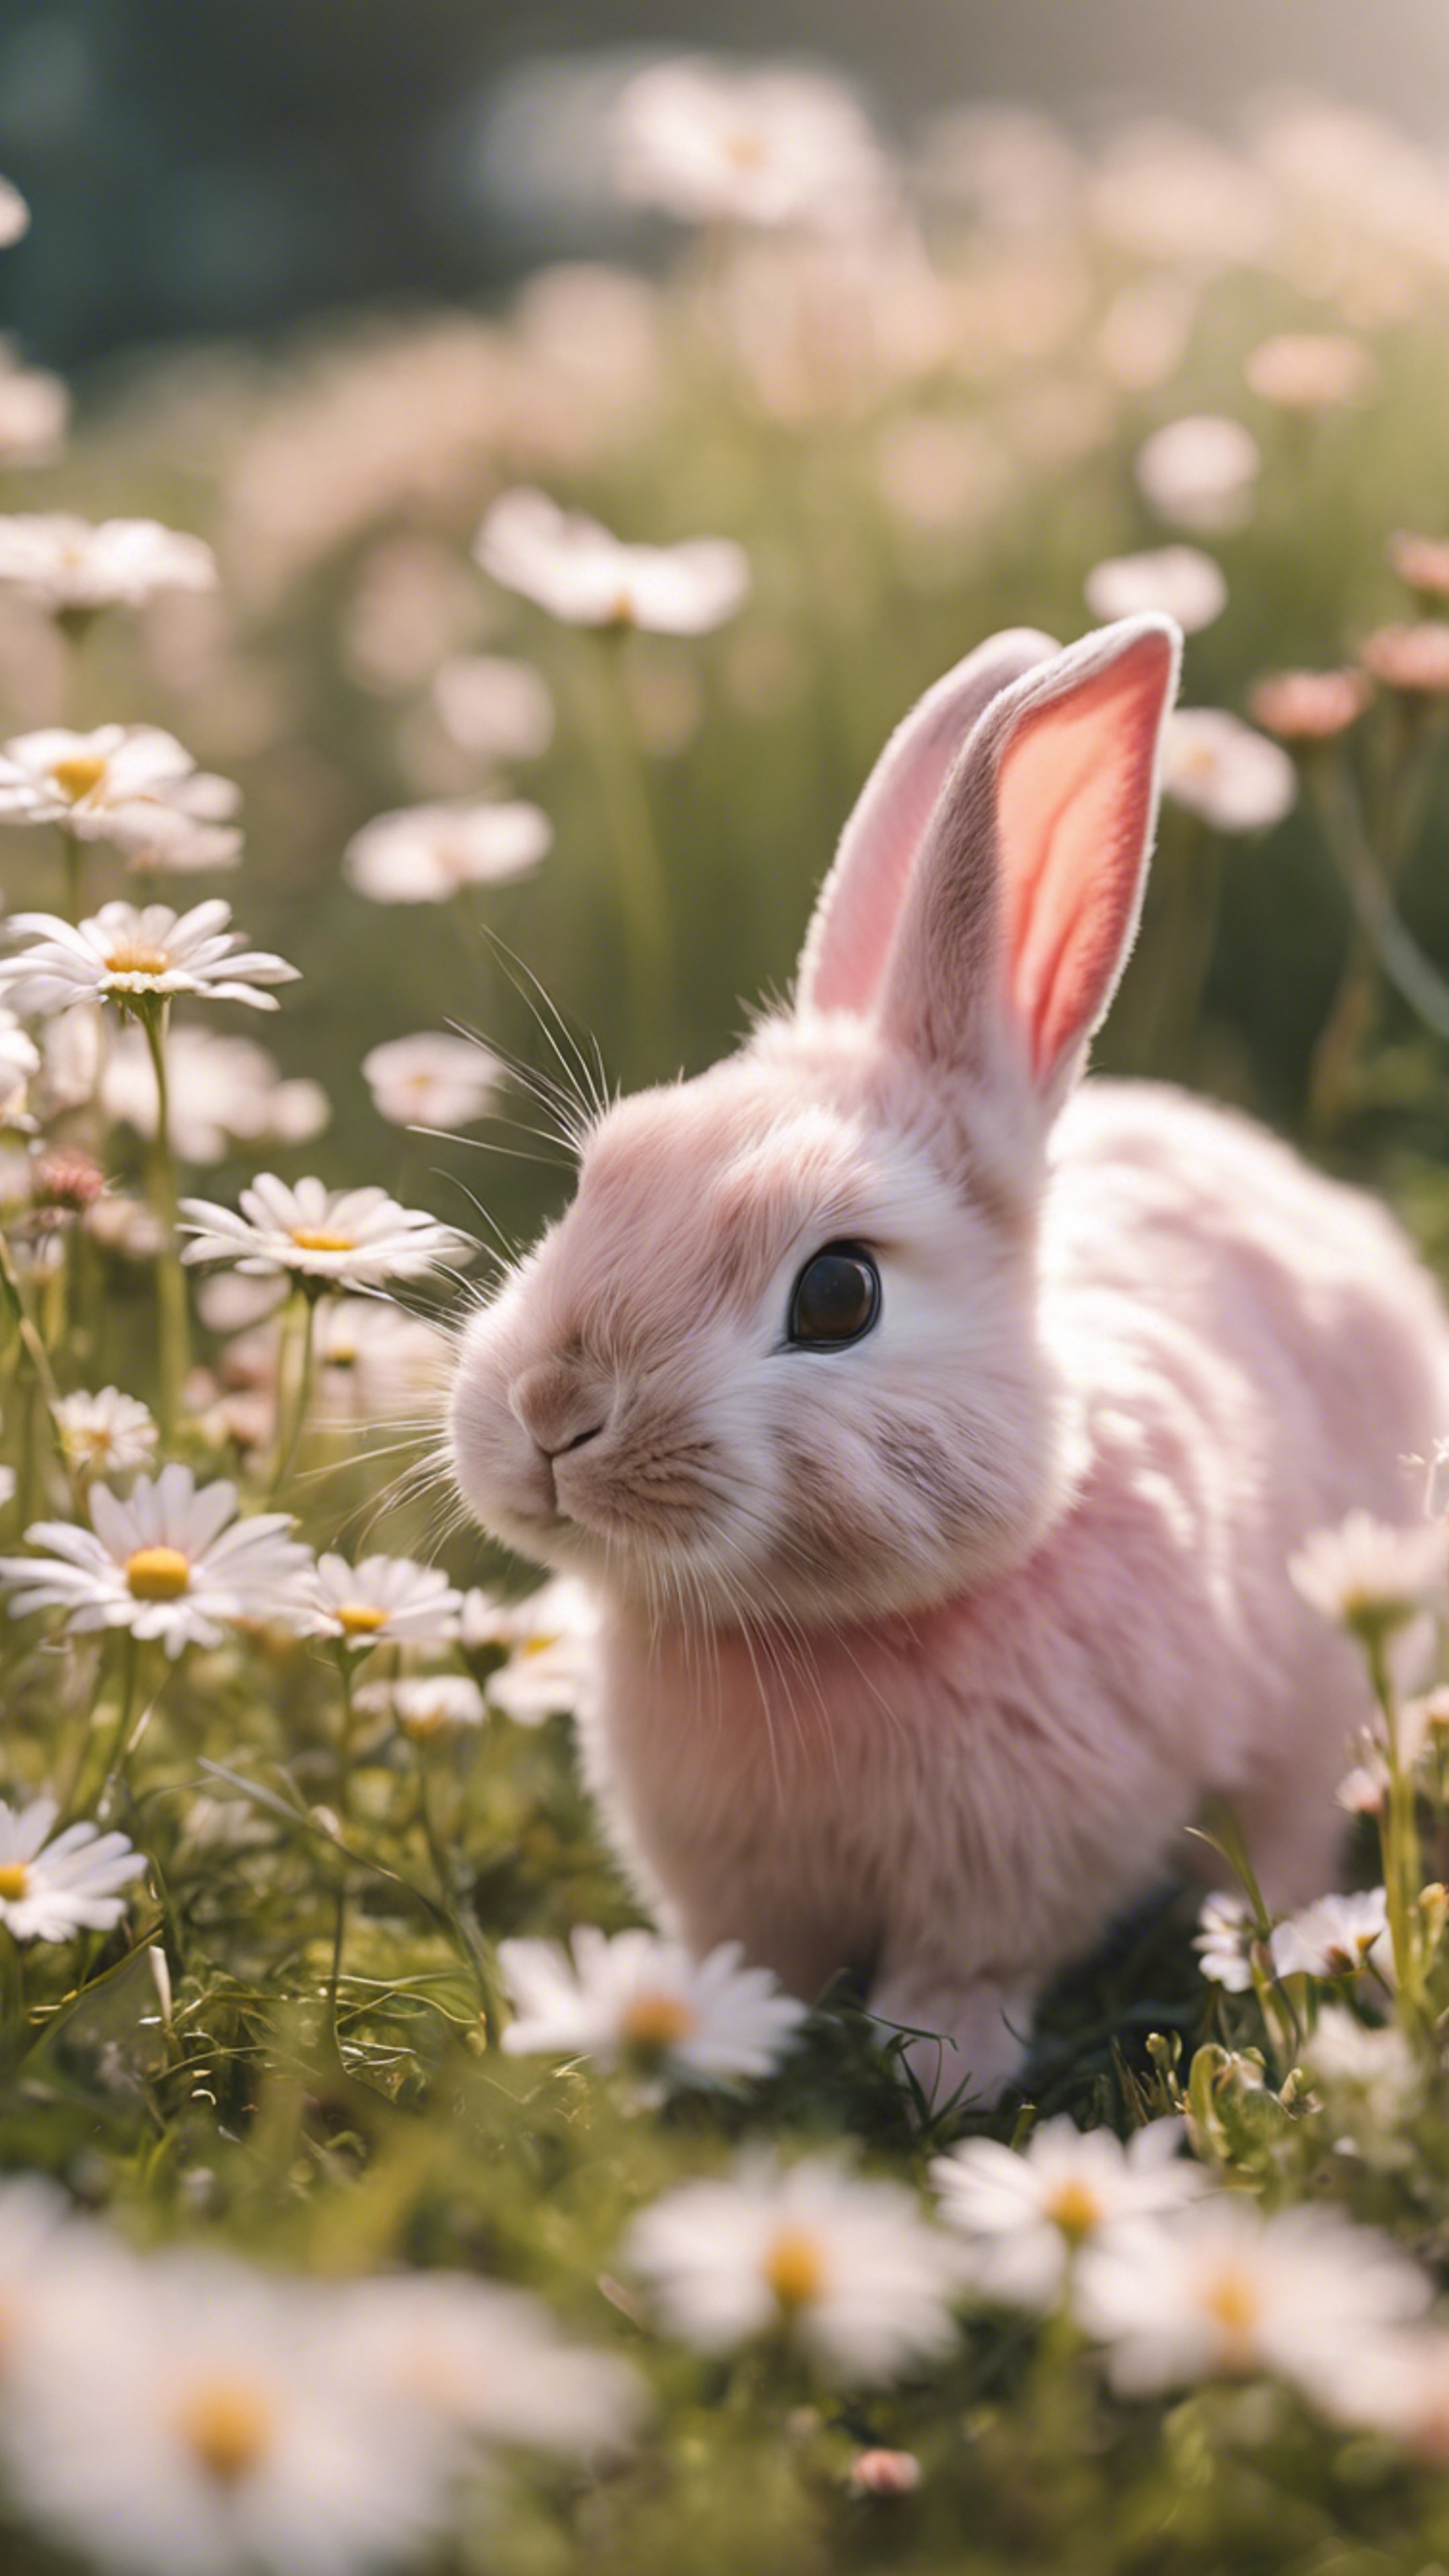 A pack of blush pink, Kawaii style rabbits happily playing in a field of daisies. Tapeta[cf36497c89454393a51d]